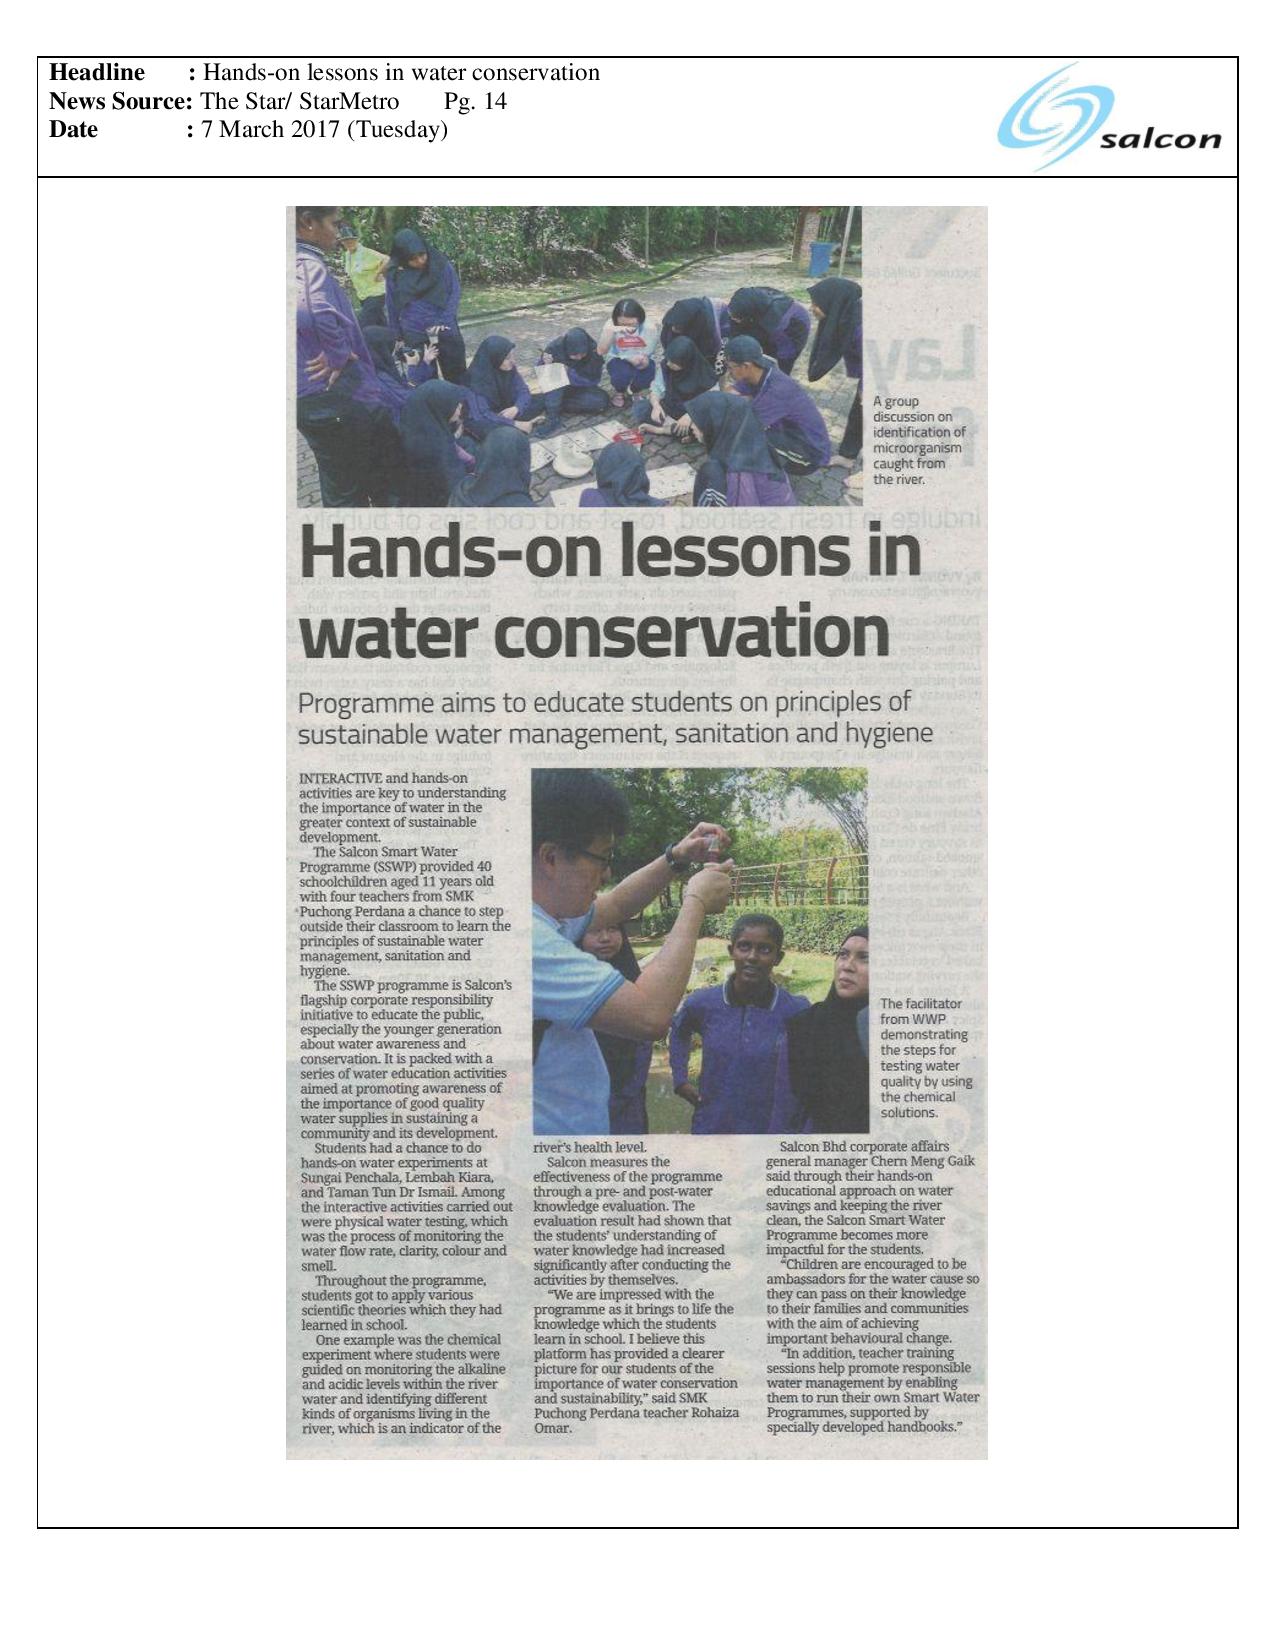 Hands-on lessons in water conservation